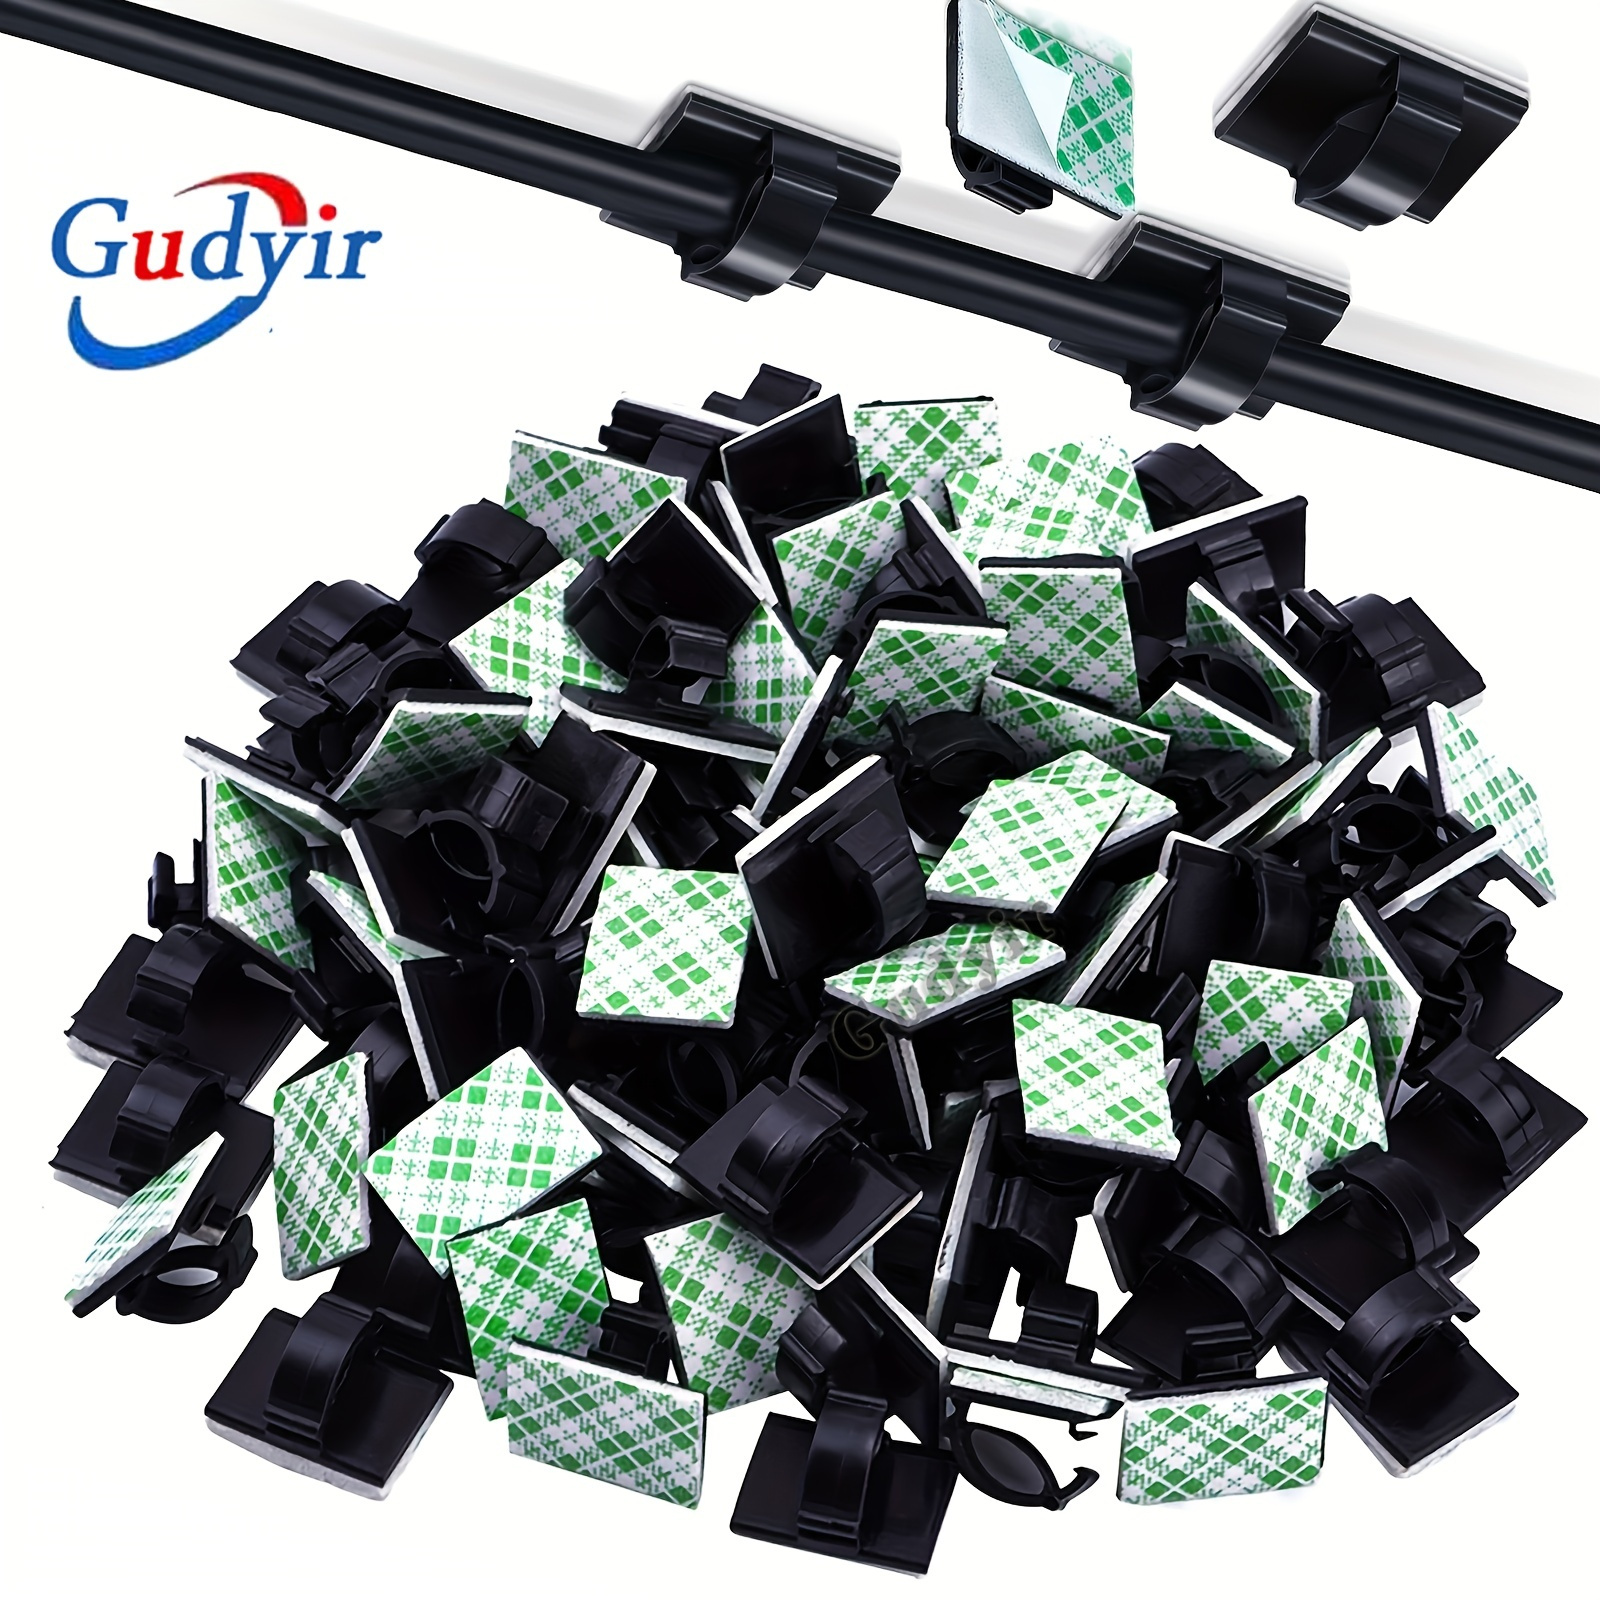 

50pcs Adhesive Cable Clips Wire Clips Cable Wire Management Wire Cable Holder Clamps Cable Tie Holder For Car, Office And Home